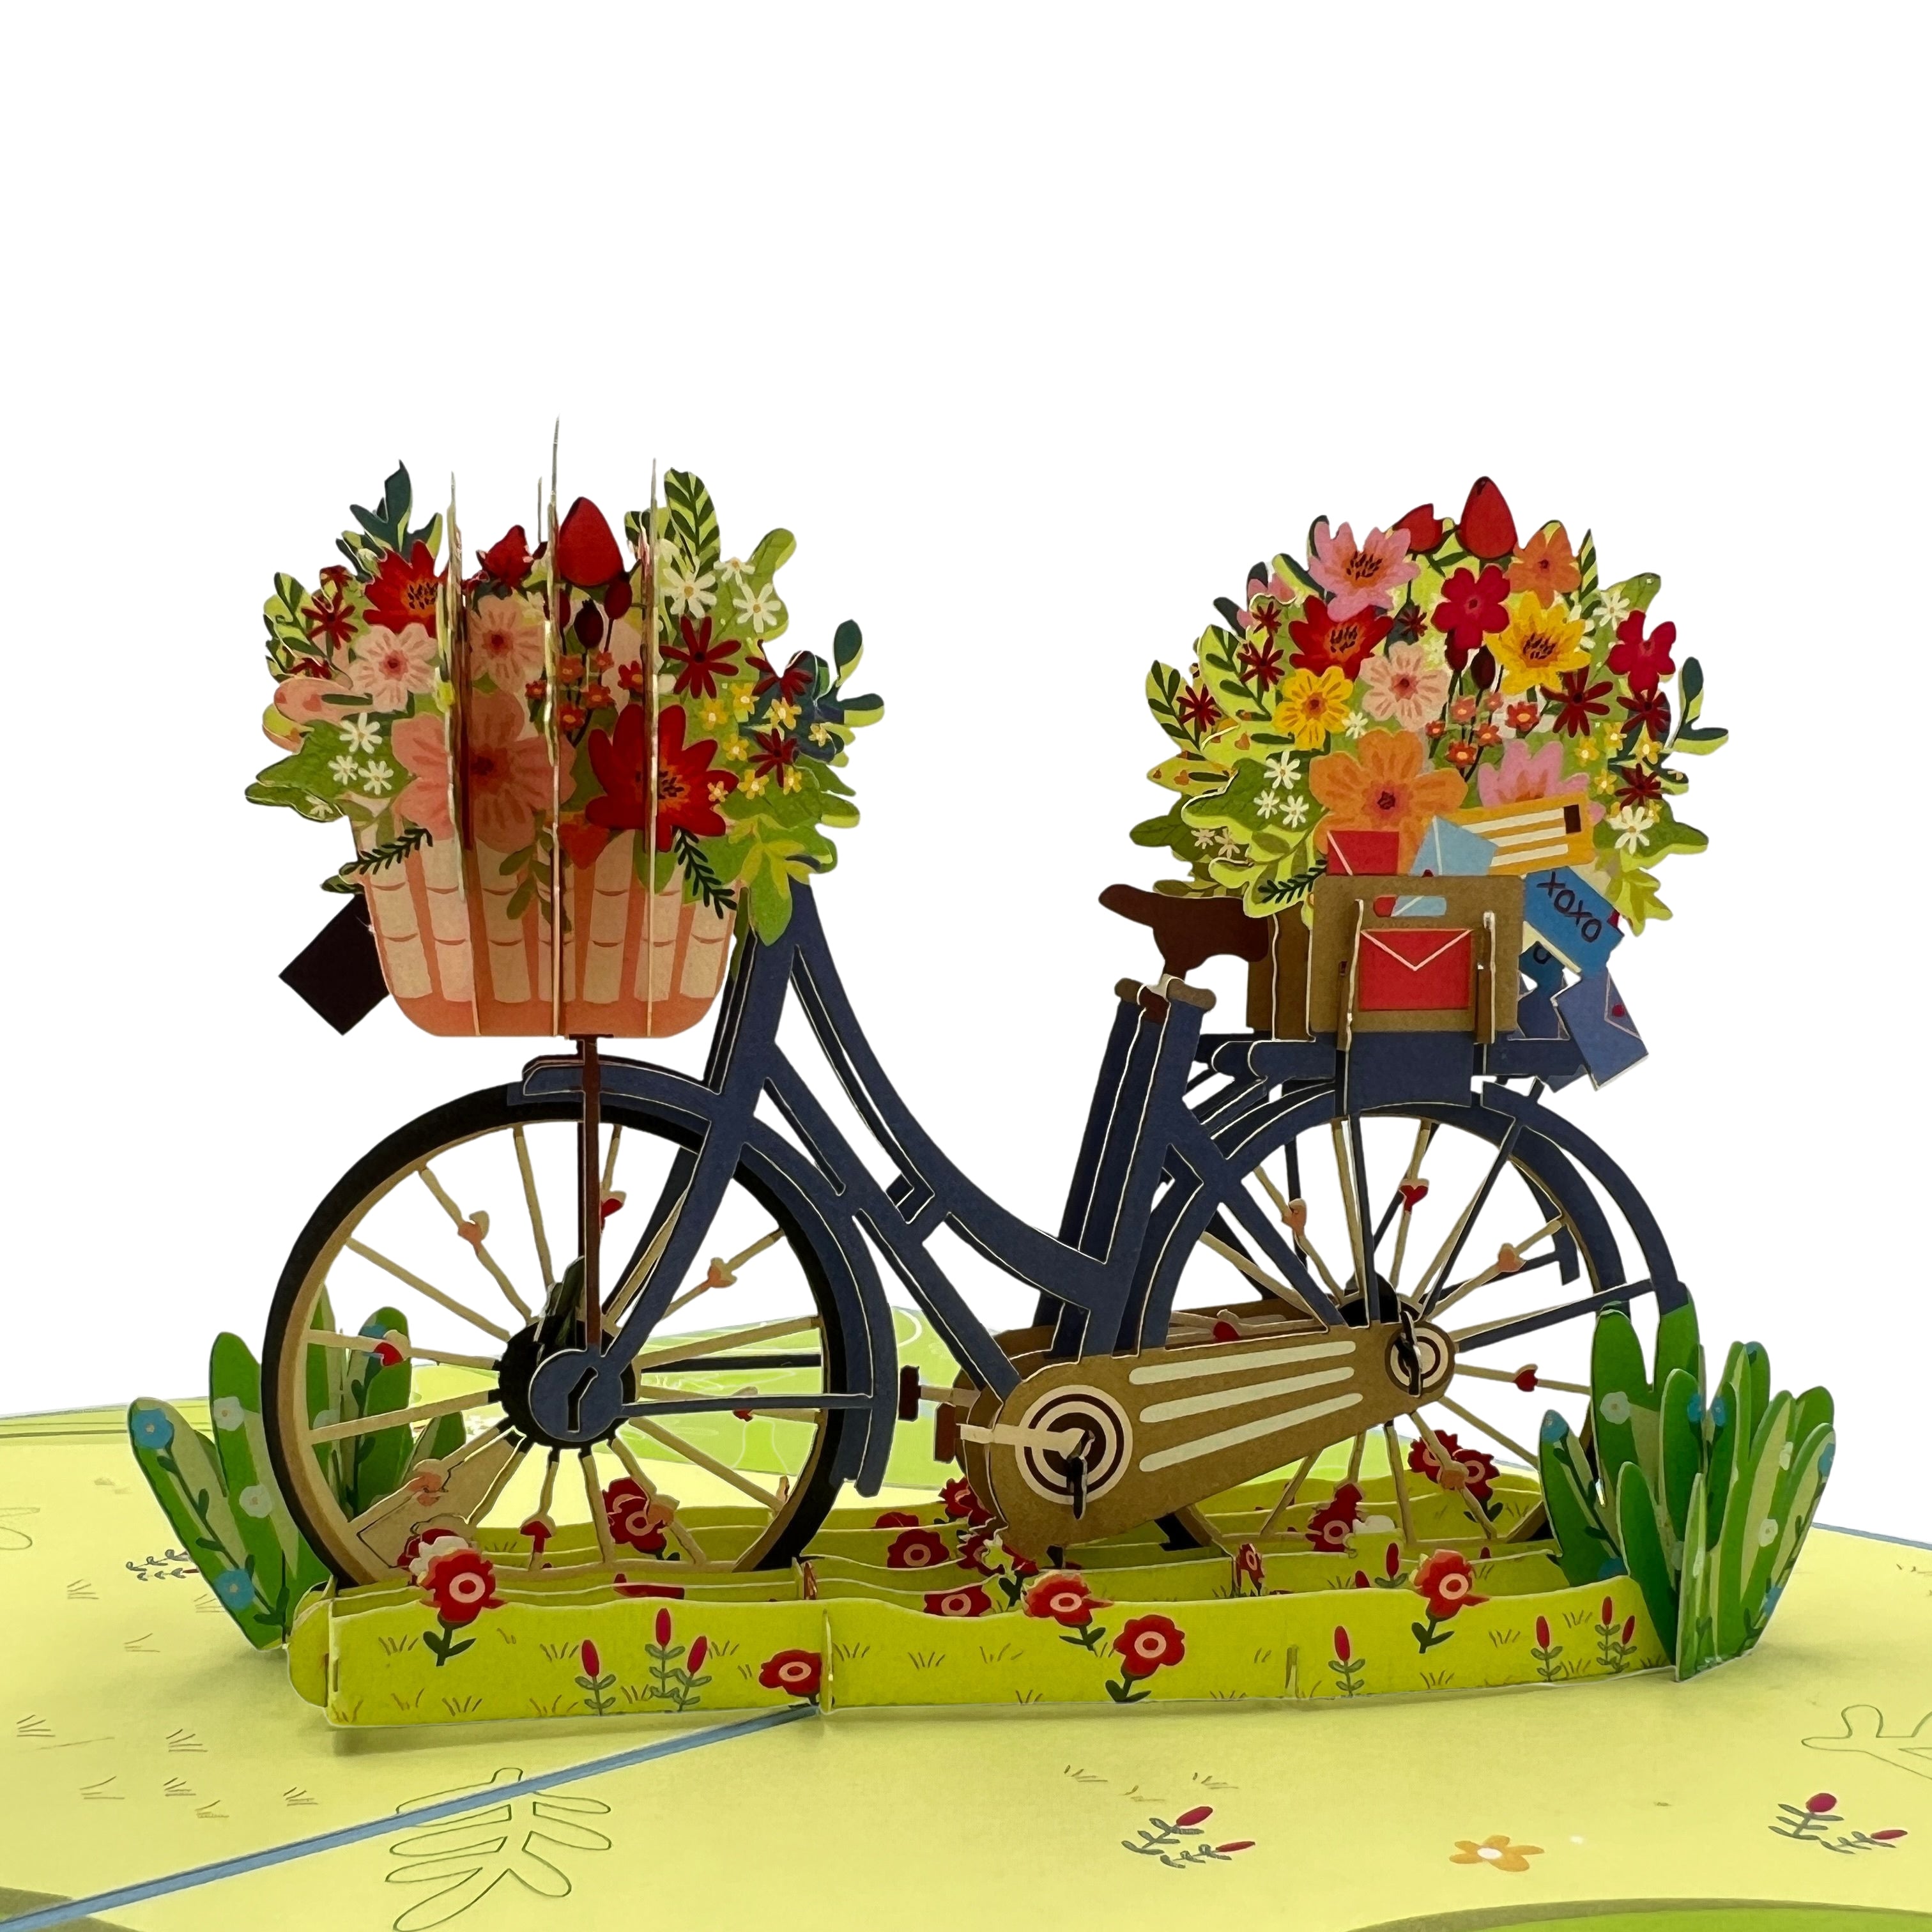 Pop Up Greeting Card Blooming Flower on Bicycle, Romantic Card, Birthday Card, Nature Card, Outdoor Activity, Gift Cycling Card, Gardening